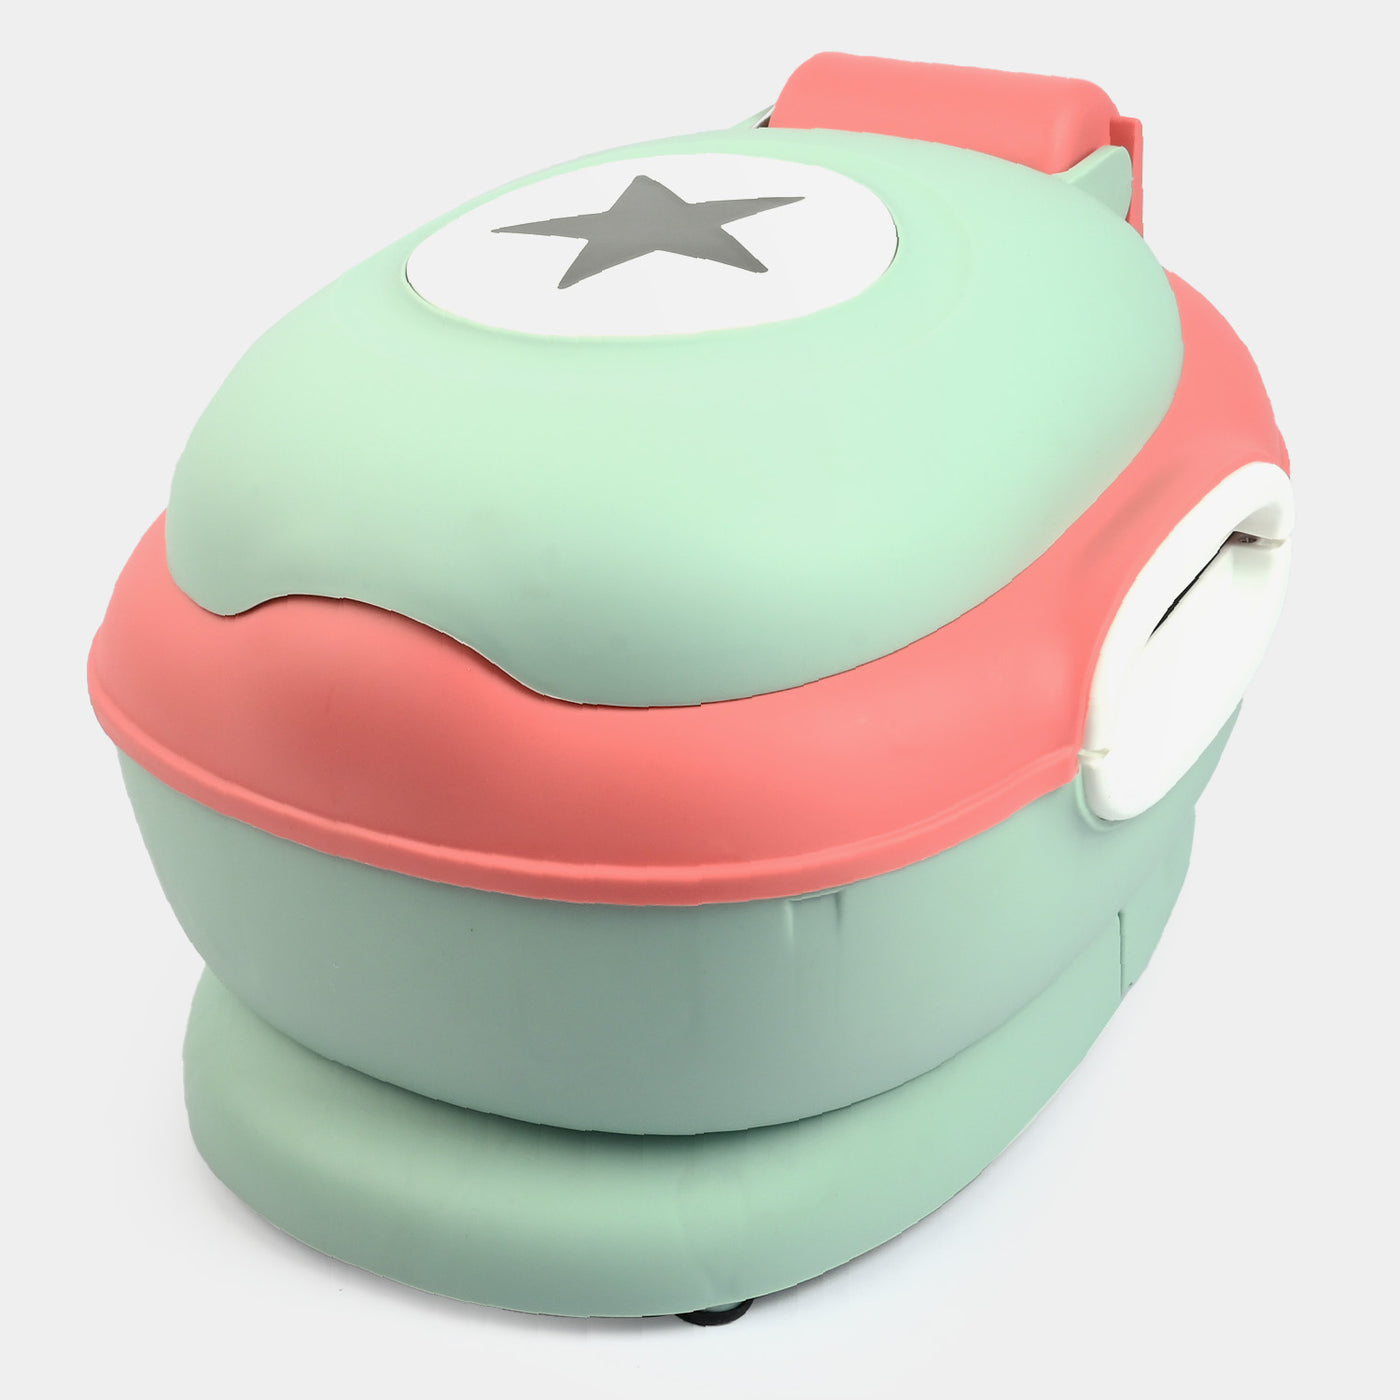 Potty Seat with Star Design Green